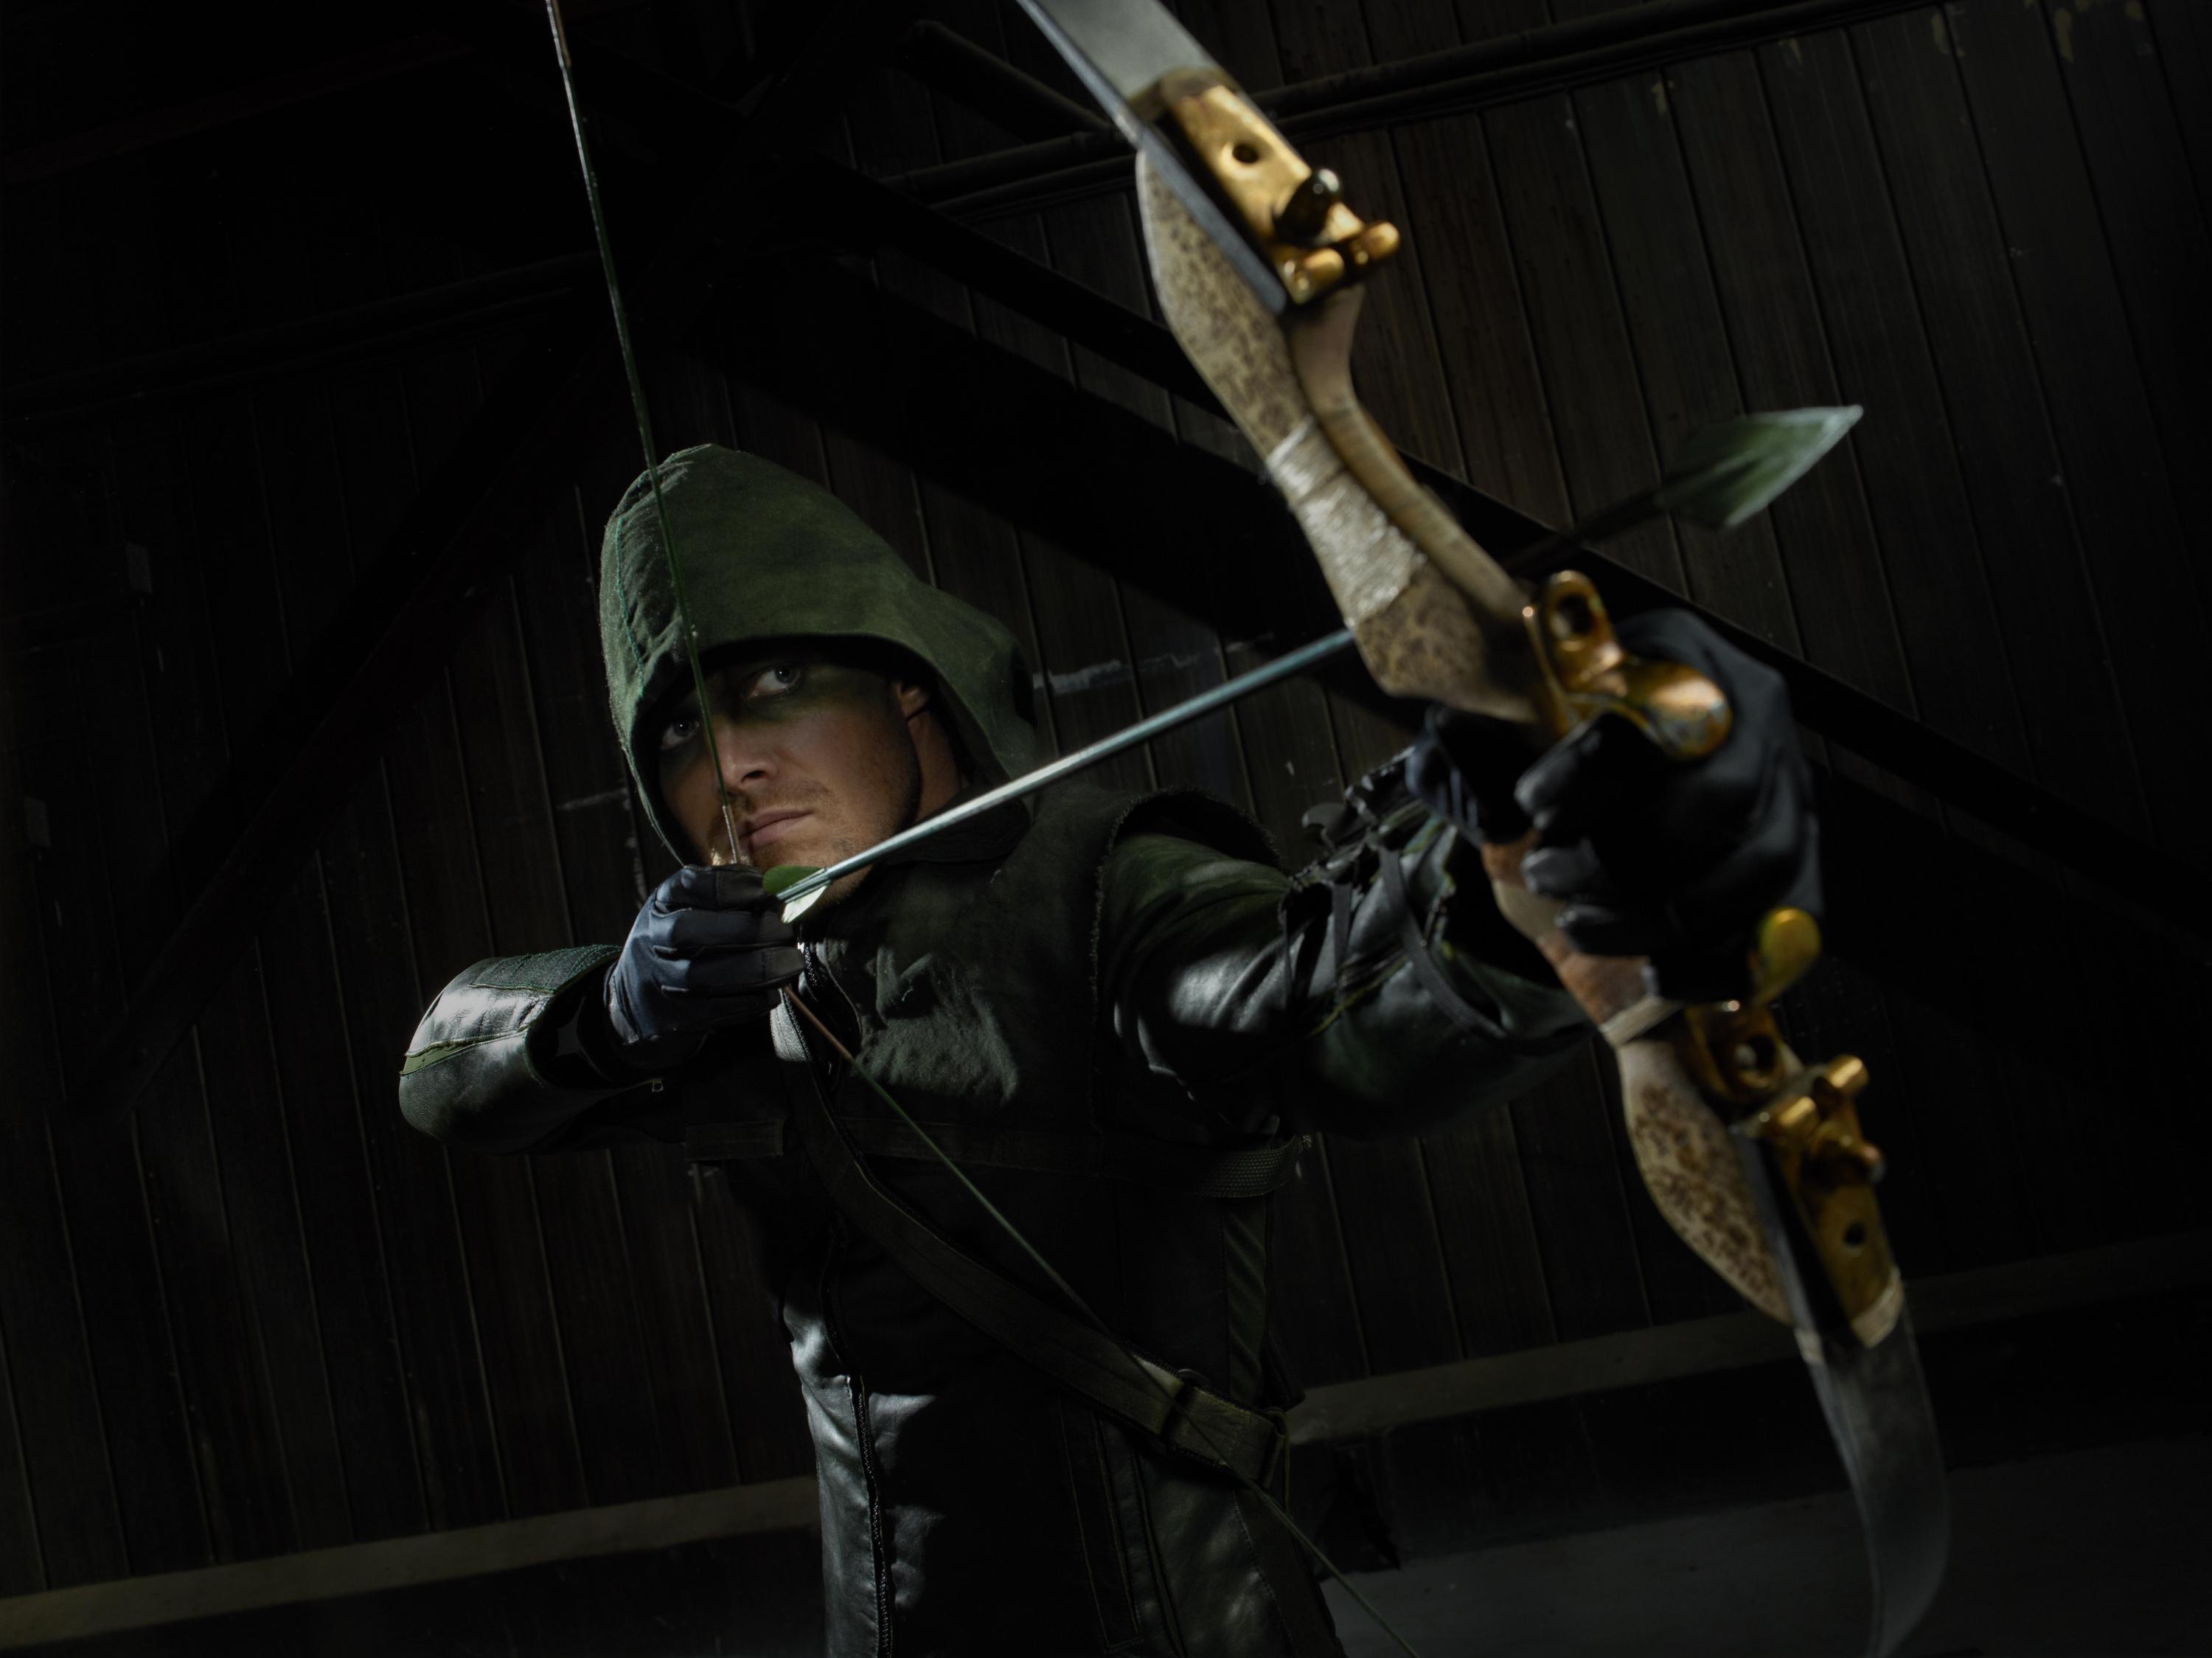 From Ic To Tv Arrow As An Adaptation Of Green